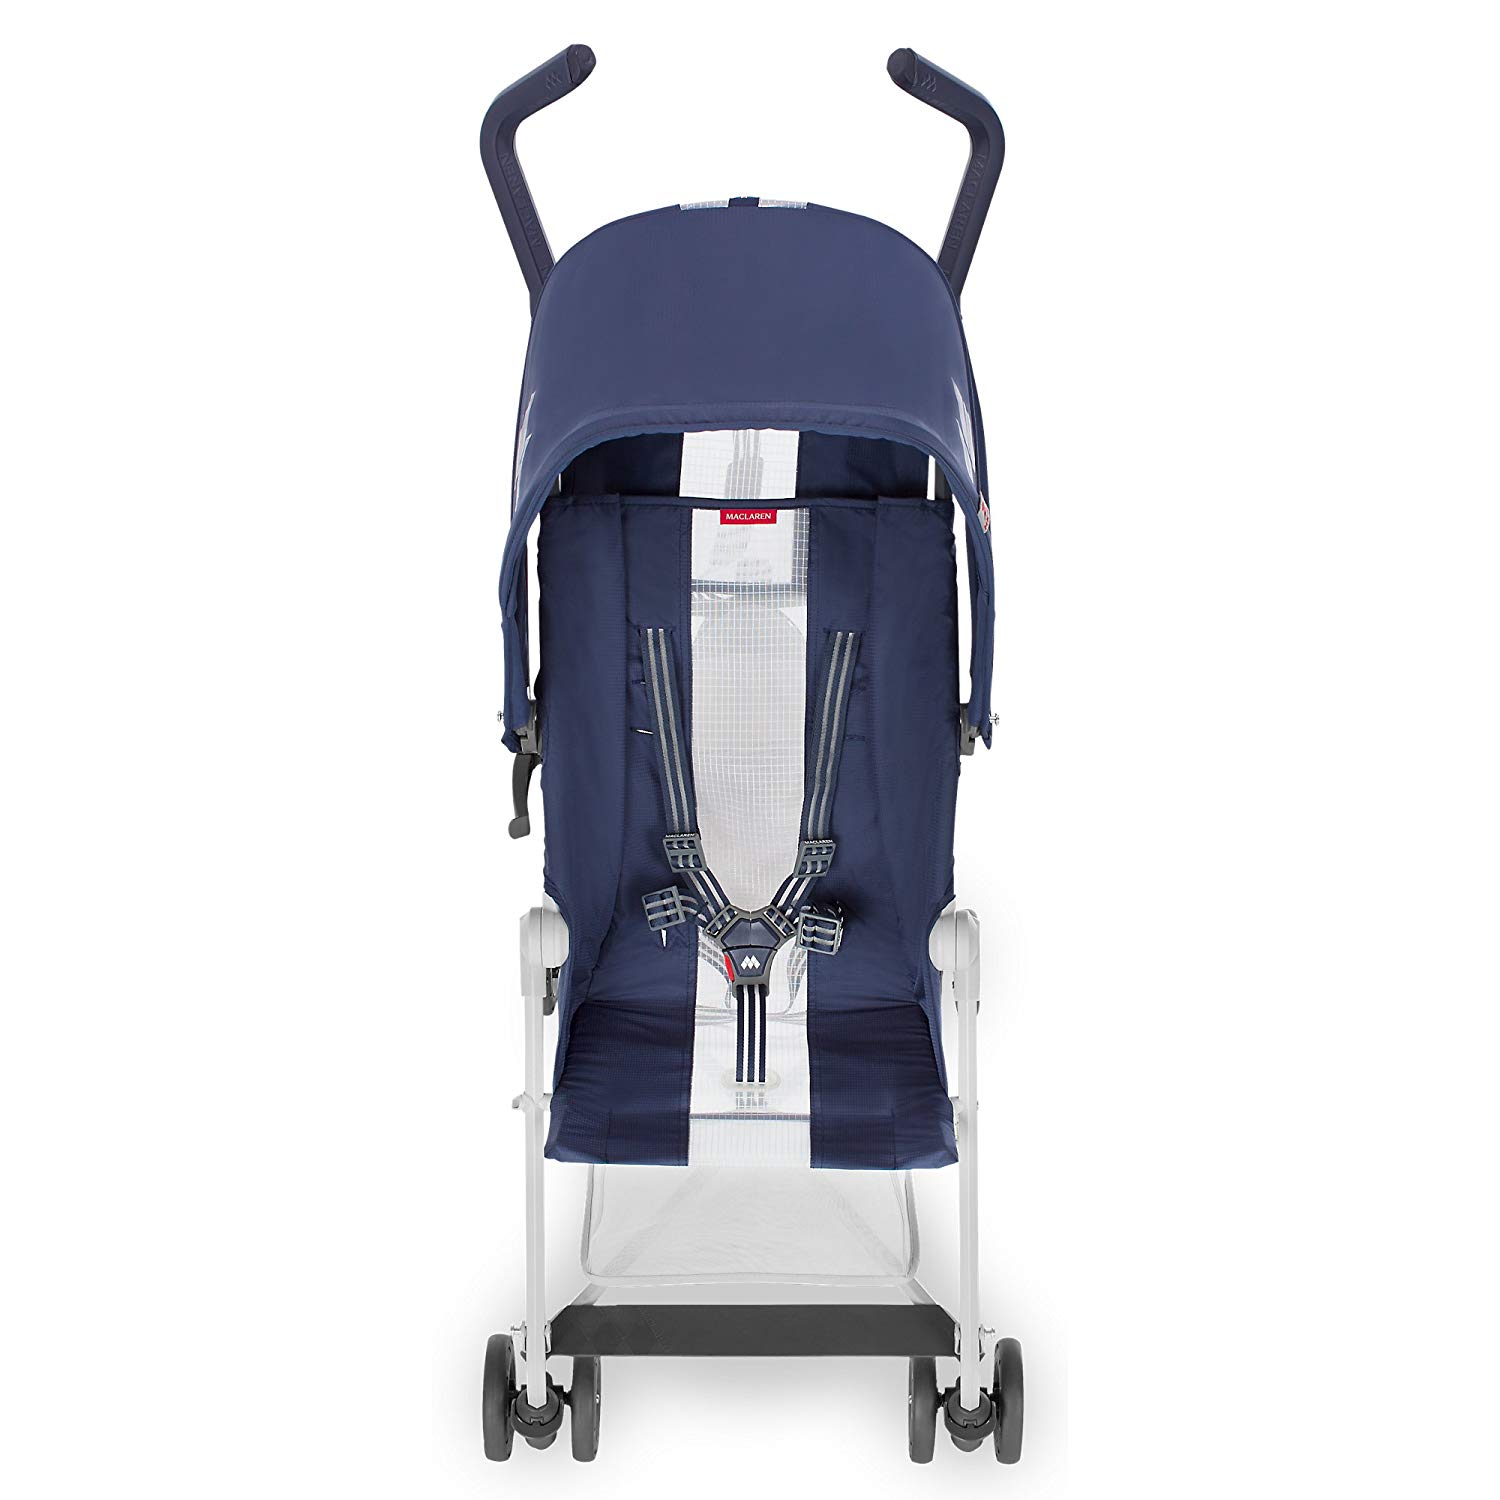 Maclaren Mark II Style Set Super Light Compact Pushchair from 6 Months to 25 kg, Extendable Waterproof Hood UPF 50+, Reclining Seat, 4WD Suspension, with Accessories, Midnight Blue